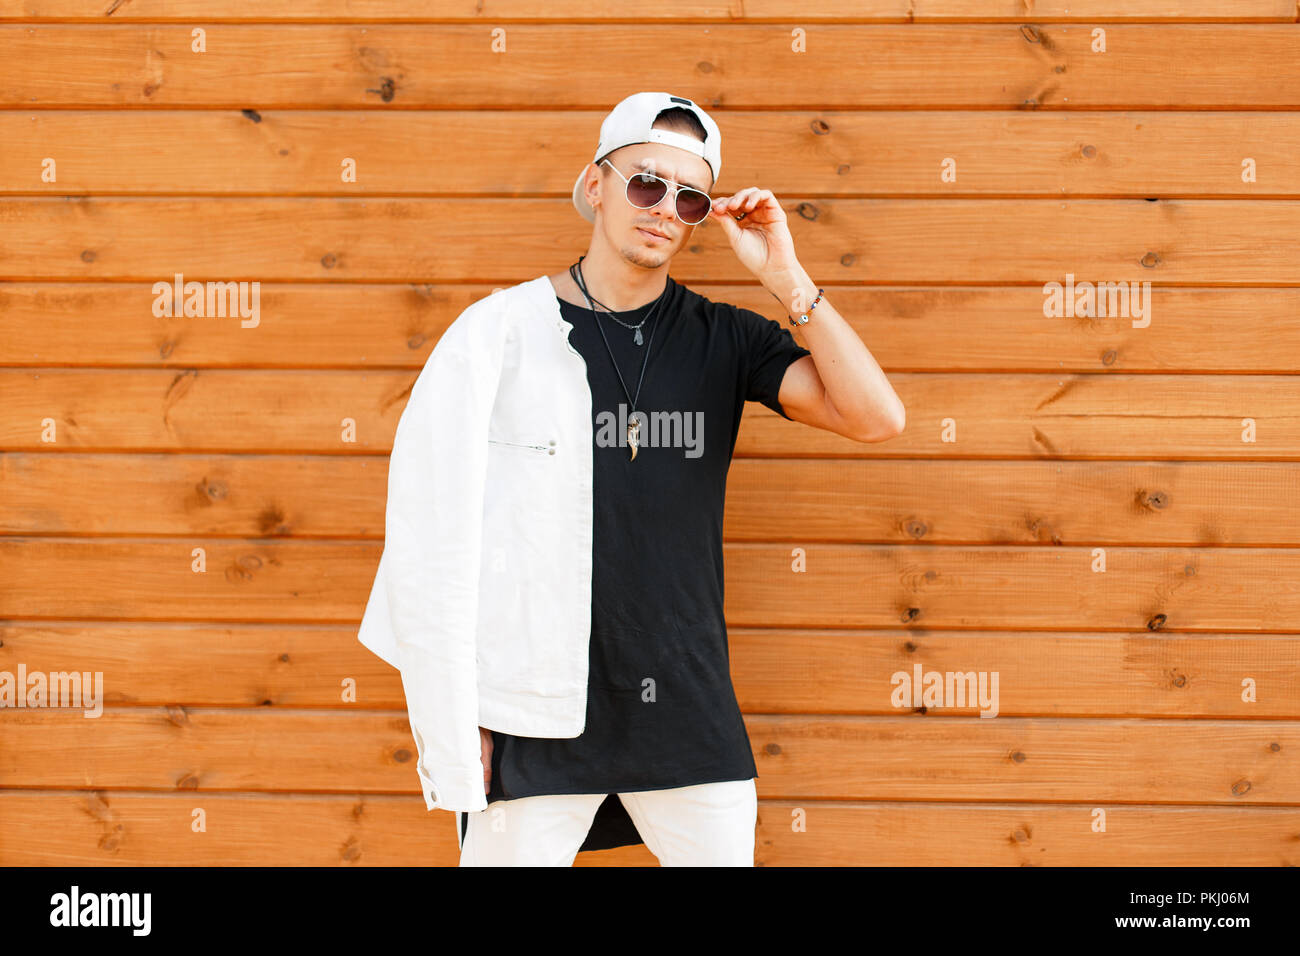 Young stylish man with sunglasses in a white jacket and a T-shirt baseball cap near the wooden wall Stock - Alamy